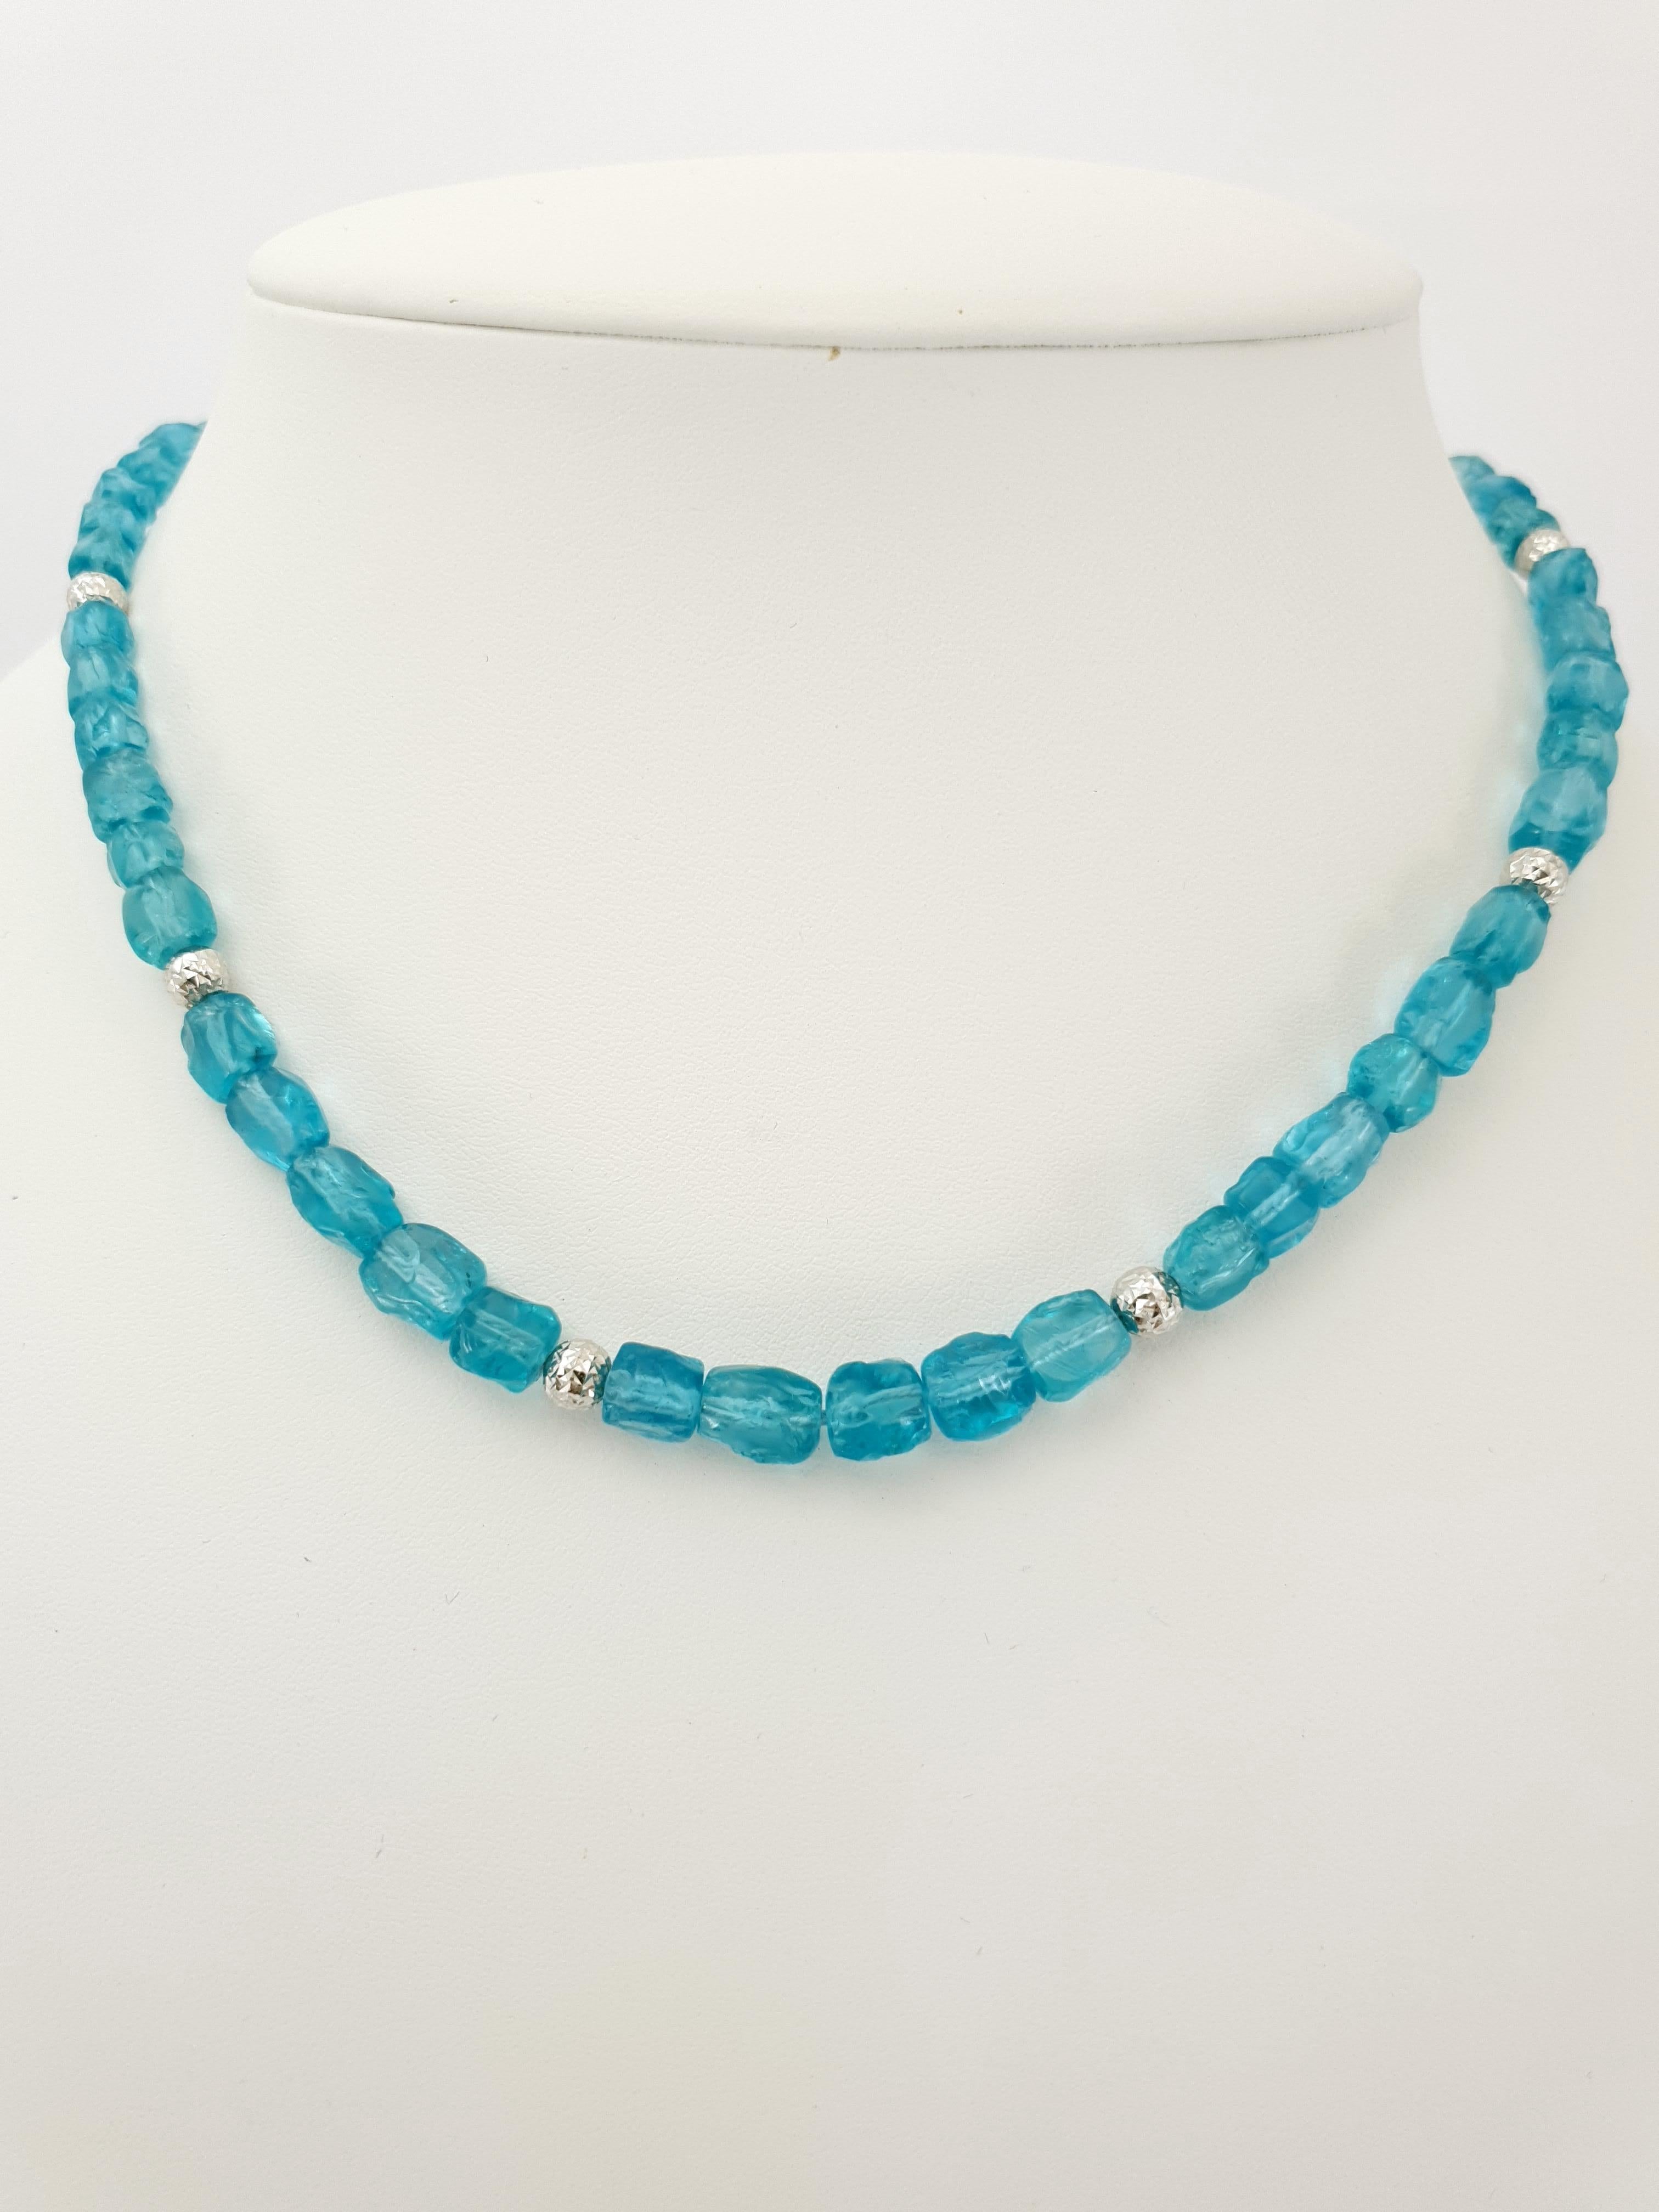 Contemporary Paraiba Blue Apatite Nugget Beaded Necklace with 18 Carat White Gold